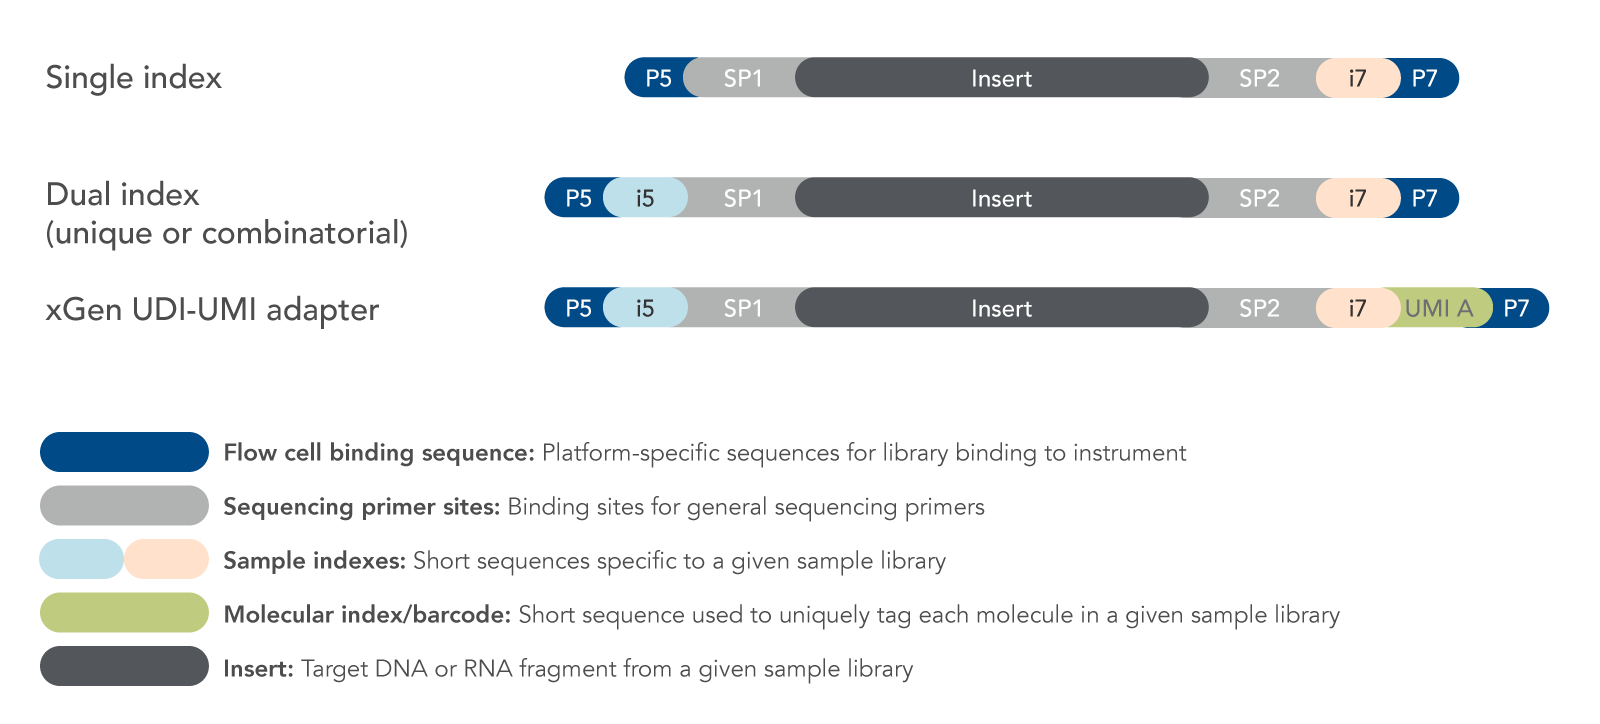 Adapters include single indexes, dual indexes, or unique molecular indexes (UMIs) in addition to flow cell binding and sequencing primer binding sites.